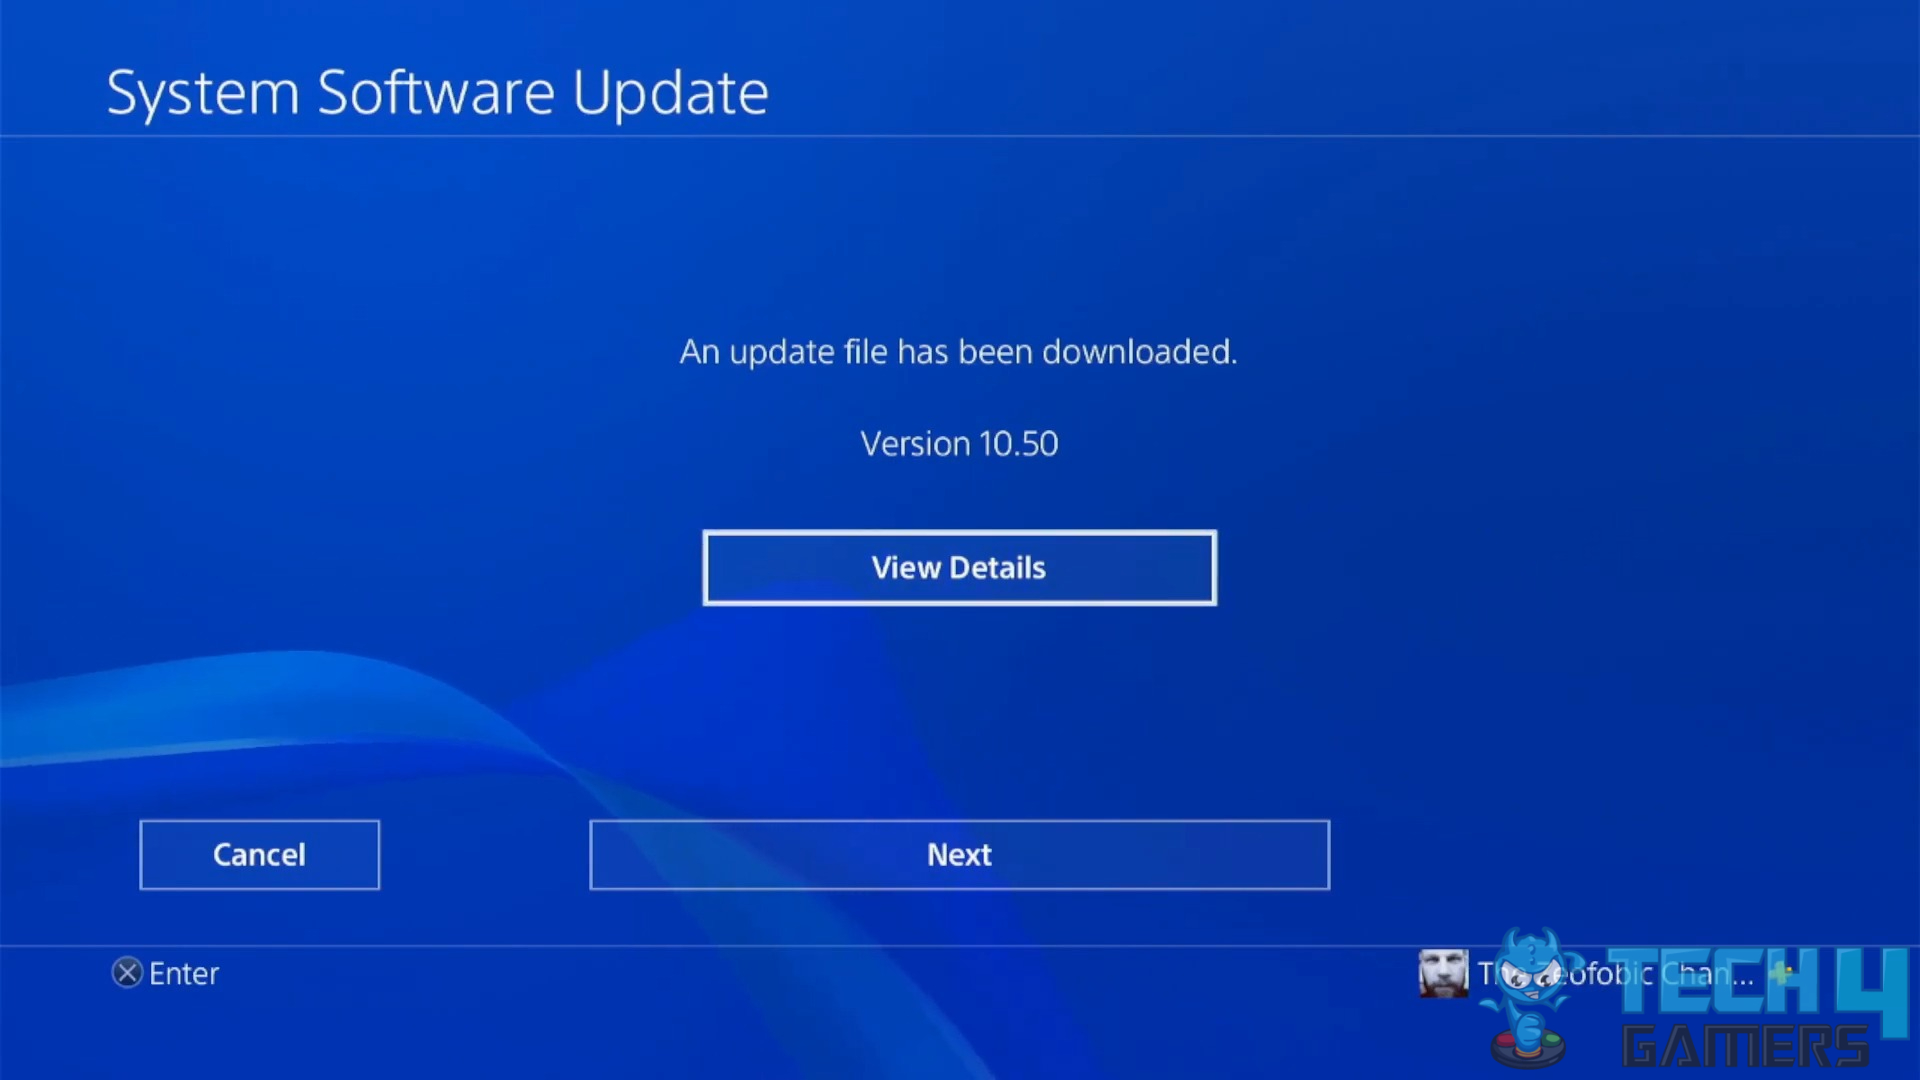 System Software update